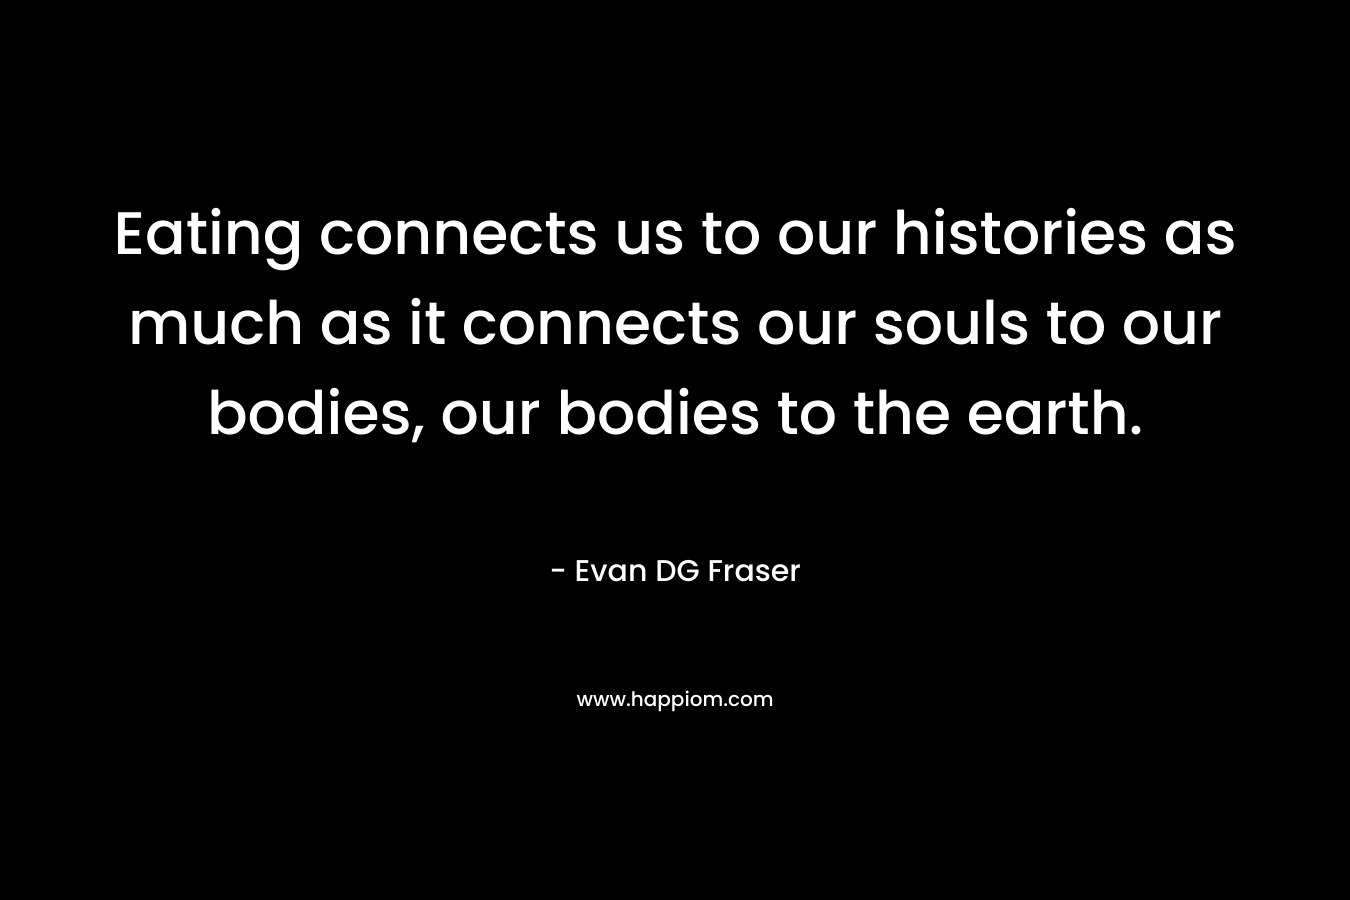 Eating connects us to our histories as much as it connects our souls to our bodies, our bodies to the earth.